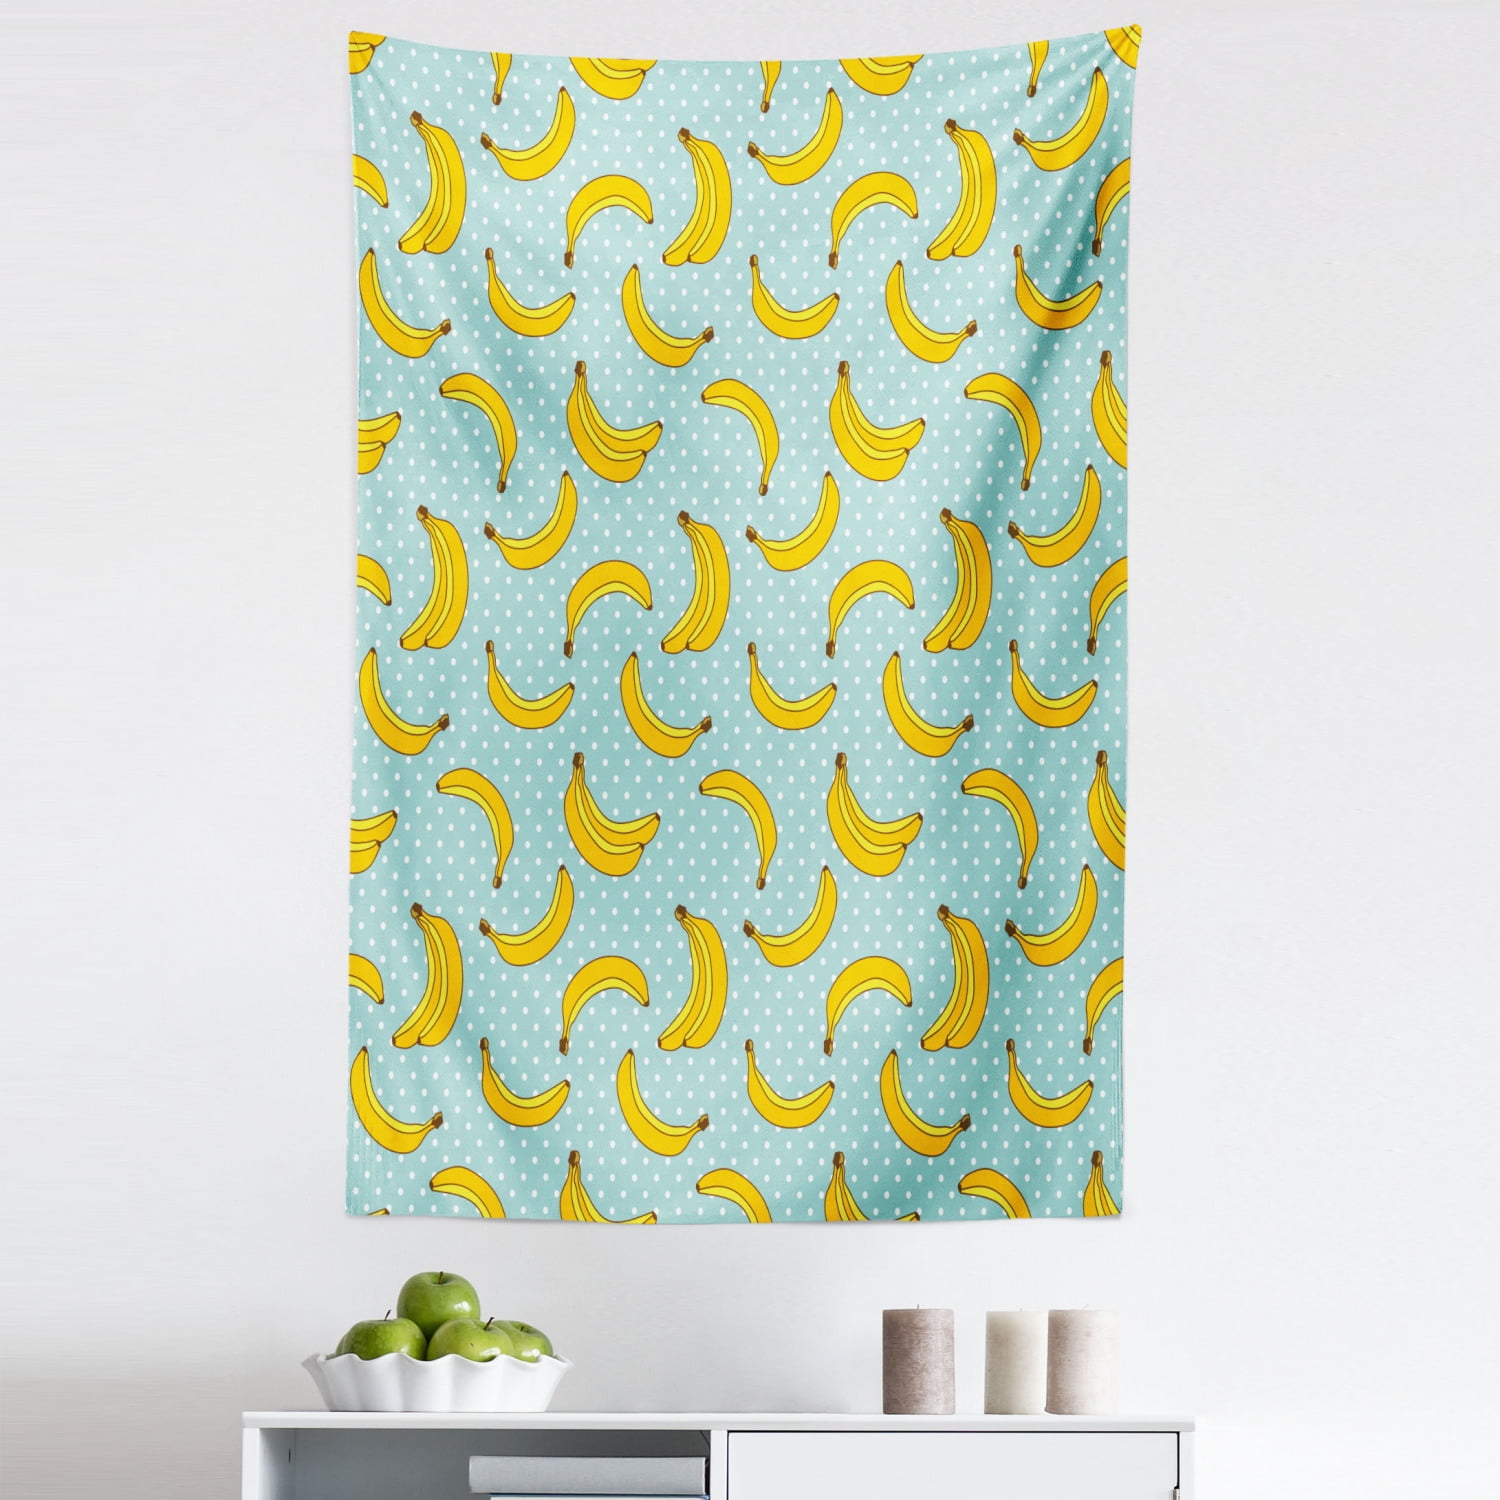 Klæbrig marv Drejning Yellow and Blue Tapestry, Polka Dots Background with Bananas Tropical Fruit  Cartoon, Fabric Wall Hanging Decor for Bedroom Living Room Dorm, 5 Sizes,  Pale Blue Yellow, by Ambesonne - Walmart.com